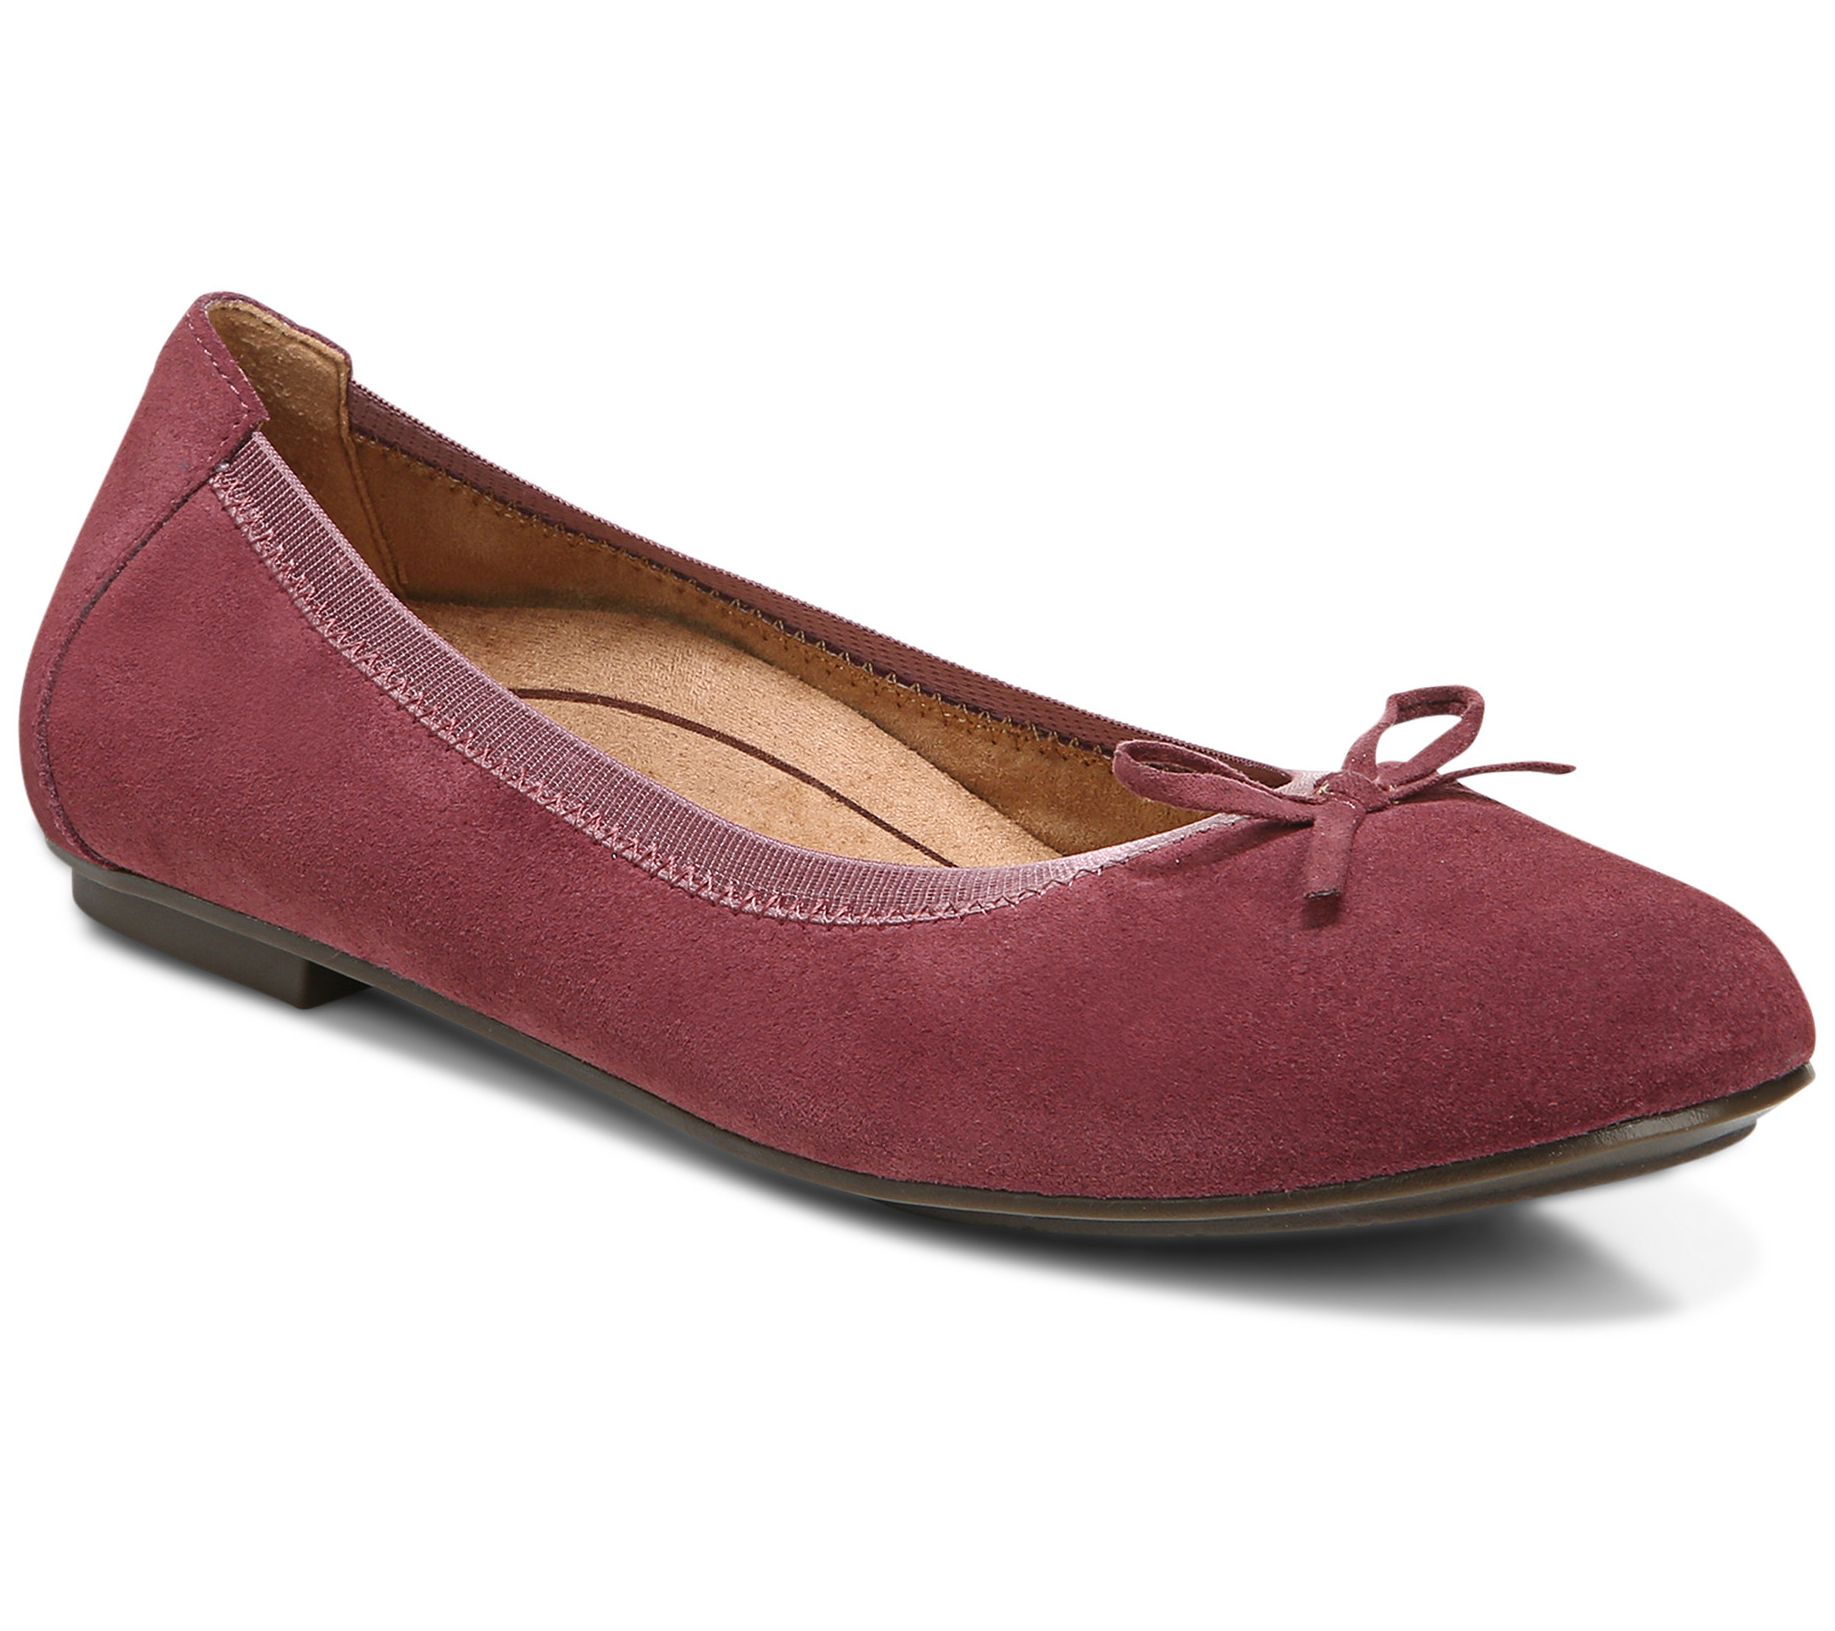 Vionic Suede Ballet Flats with Bow Detail - Liliana - QVC.com